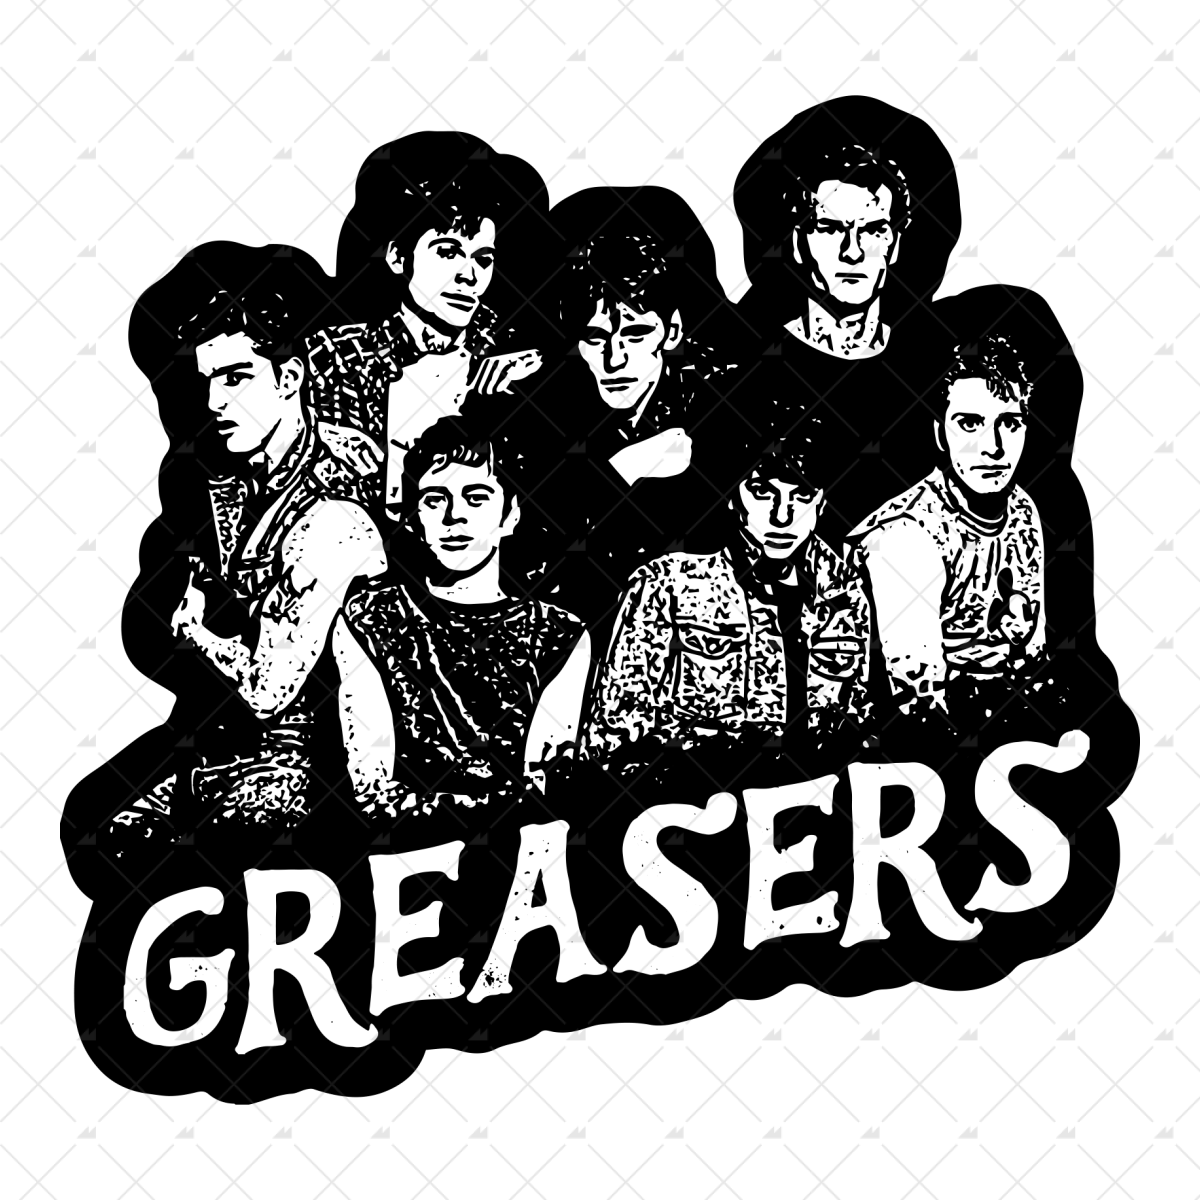 Greasers - Sticker